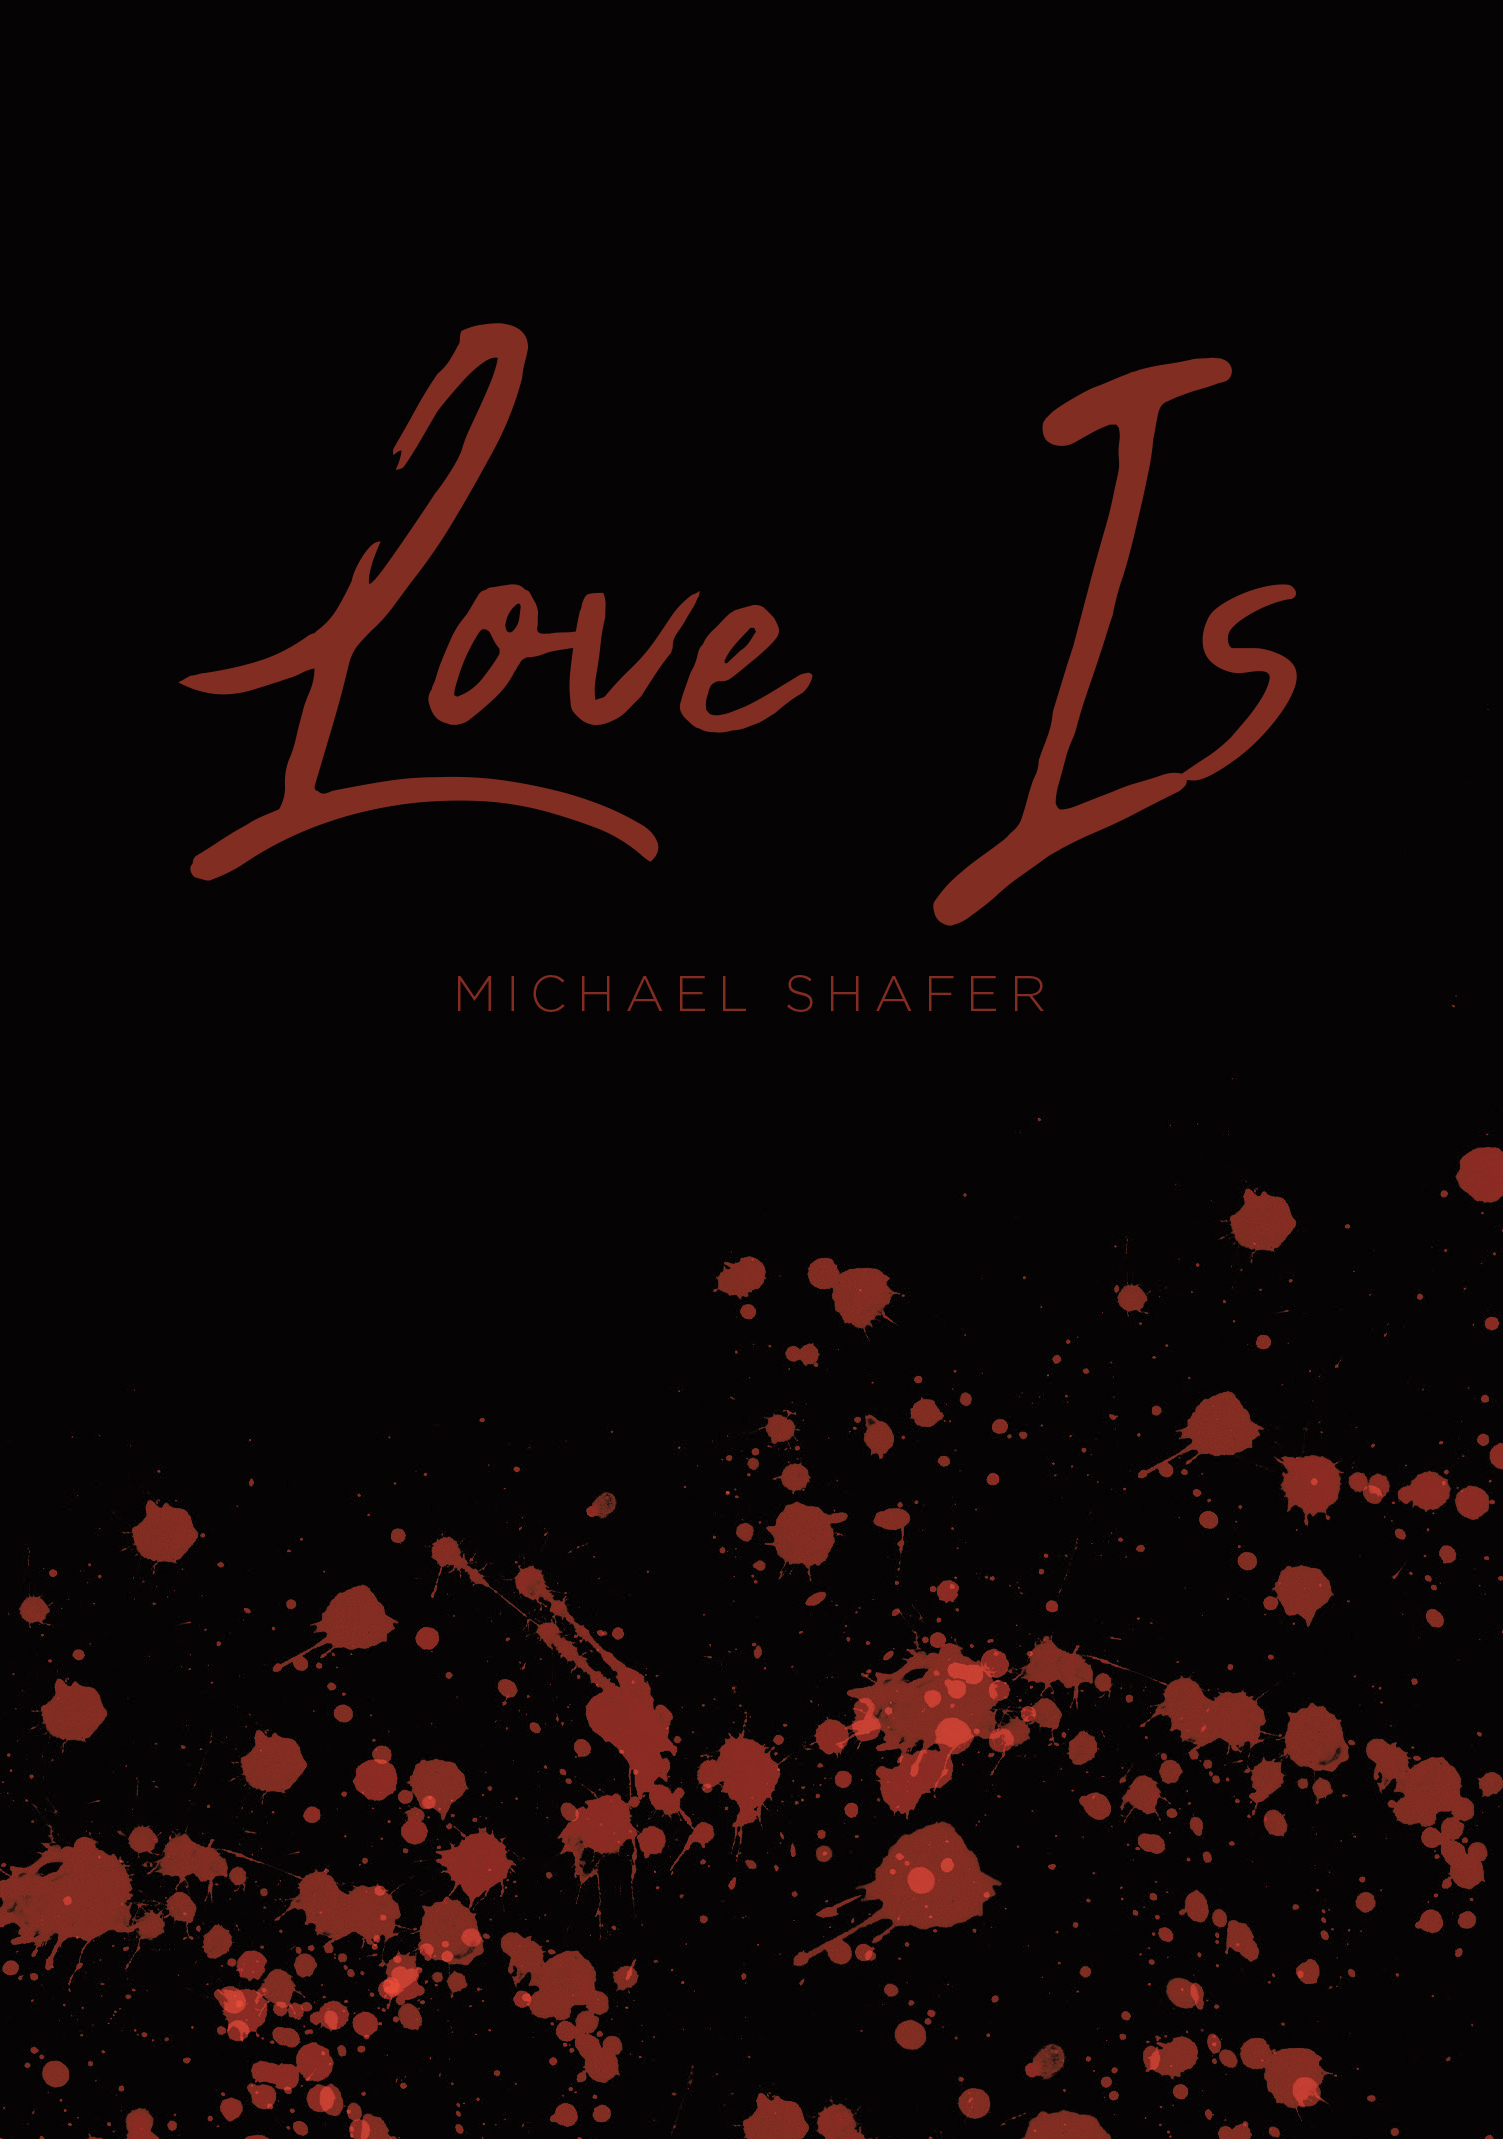 Michael Shafer’s New Book, "Love Is," is a Poignant Assortment of Poems and Ruminations Exploring the Power of Love and the Vast Array of Emotions It Can Bring About